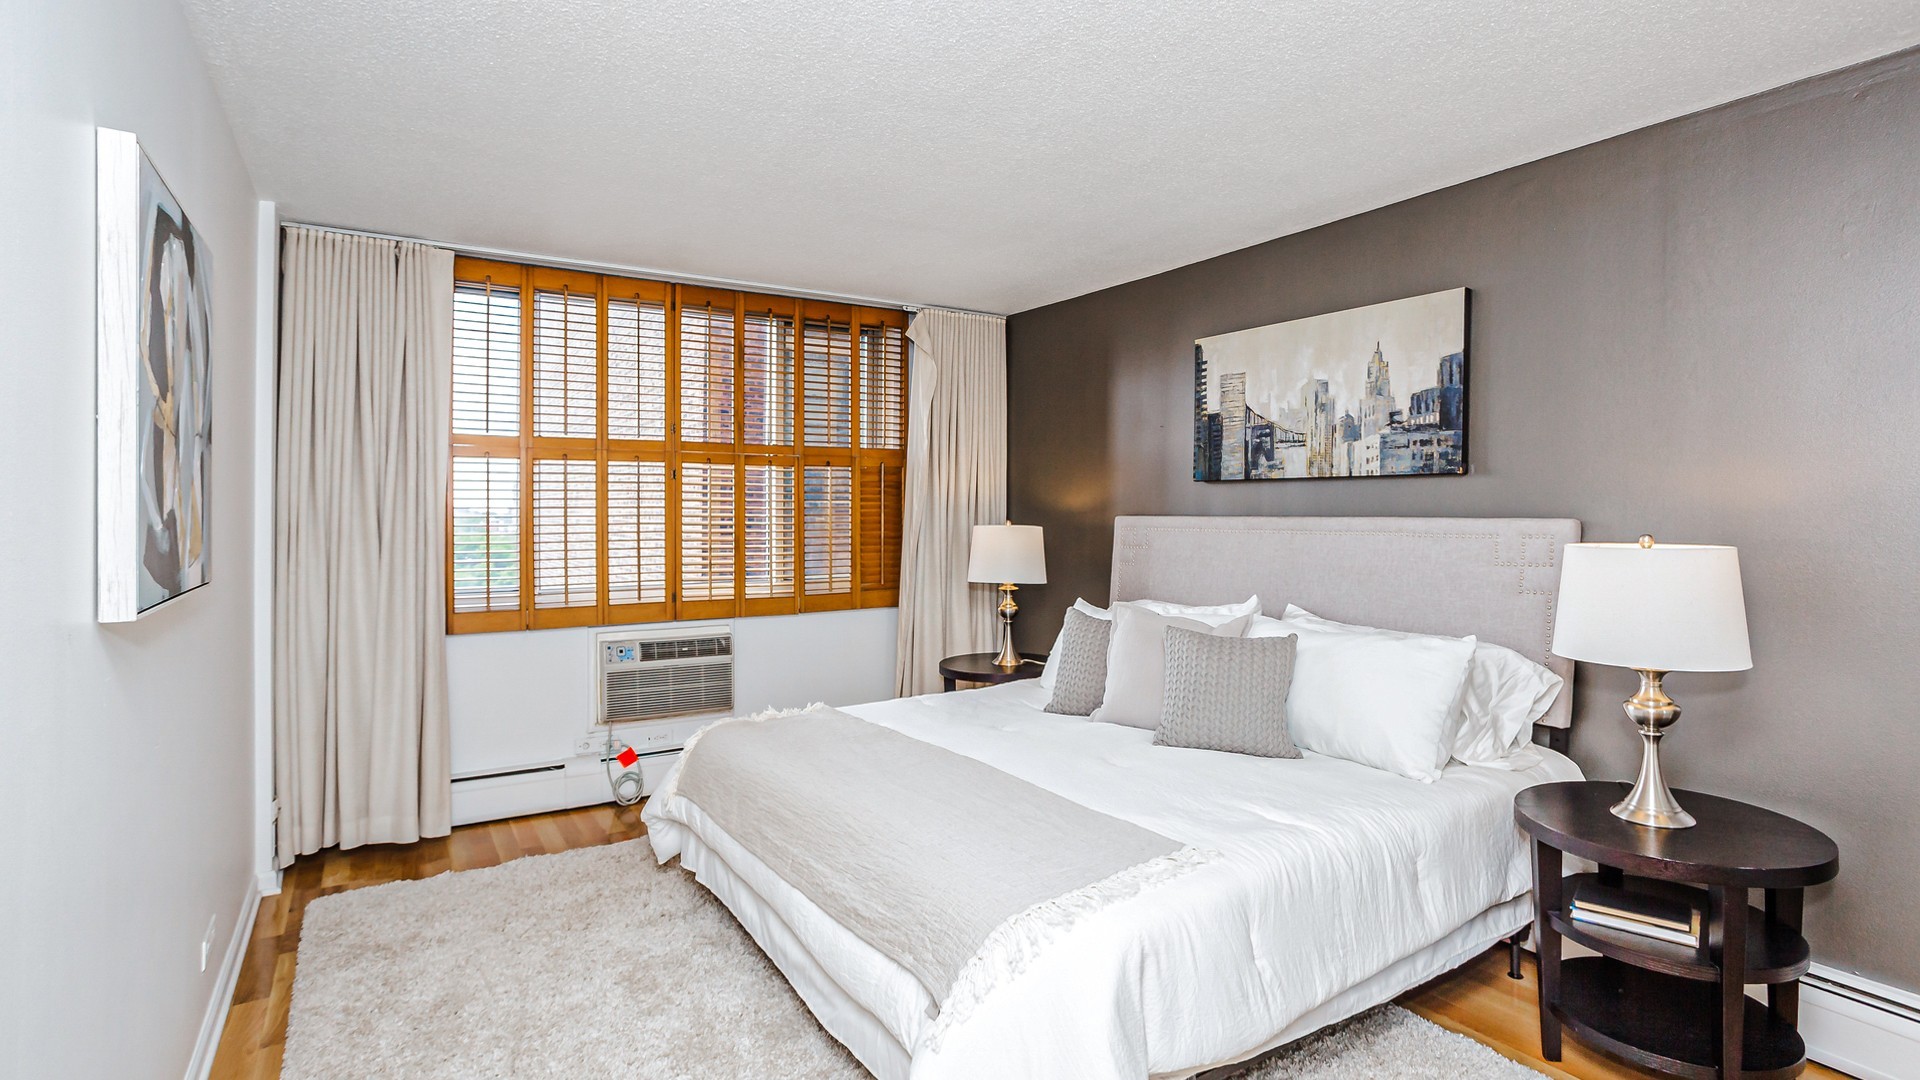 18. 2144 N Lincoln Park West W